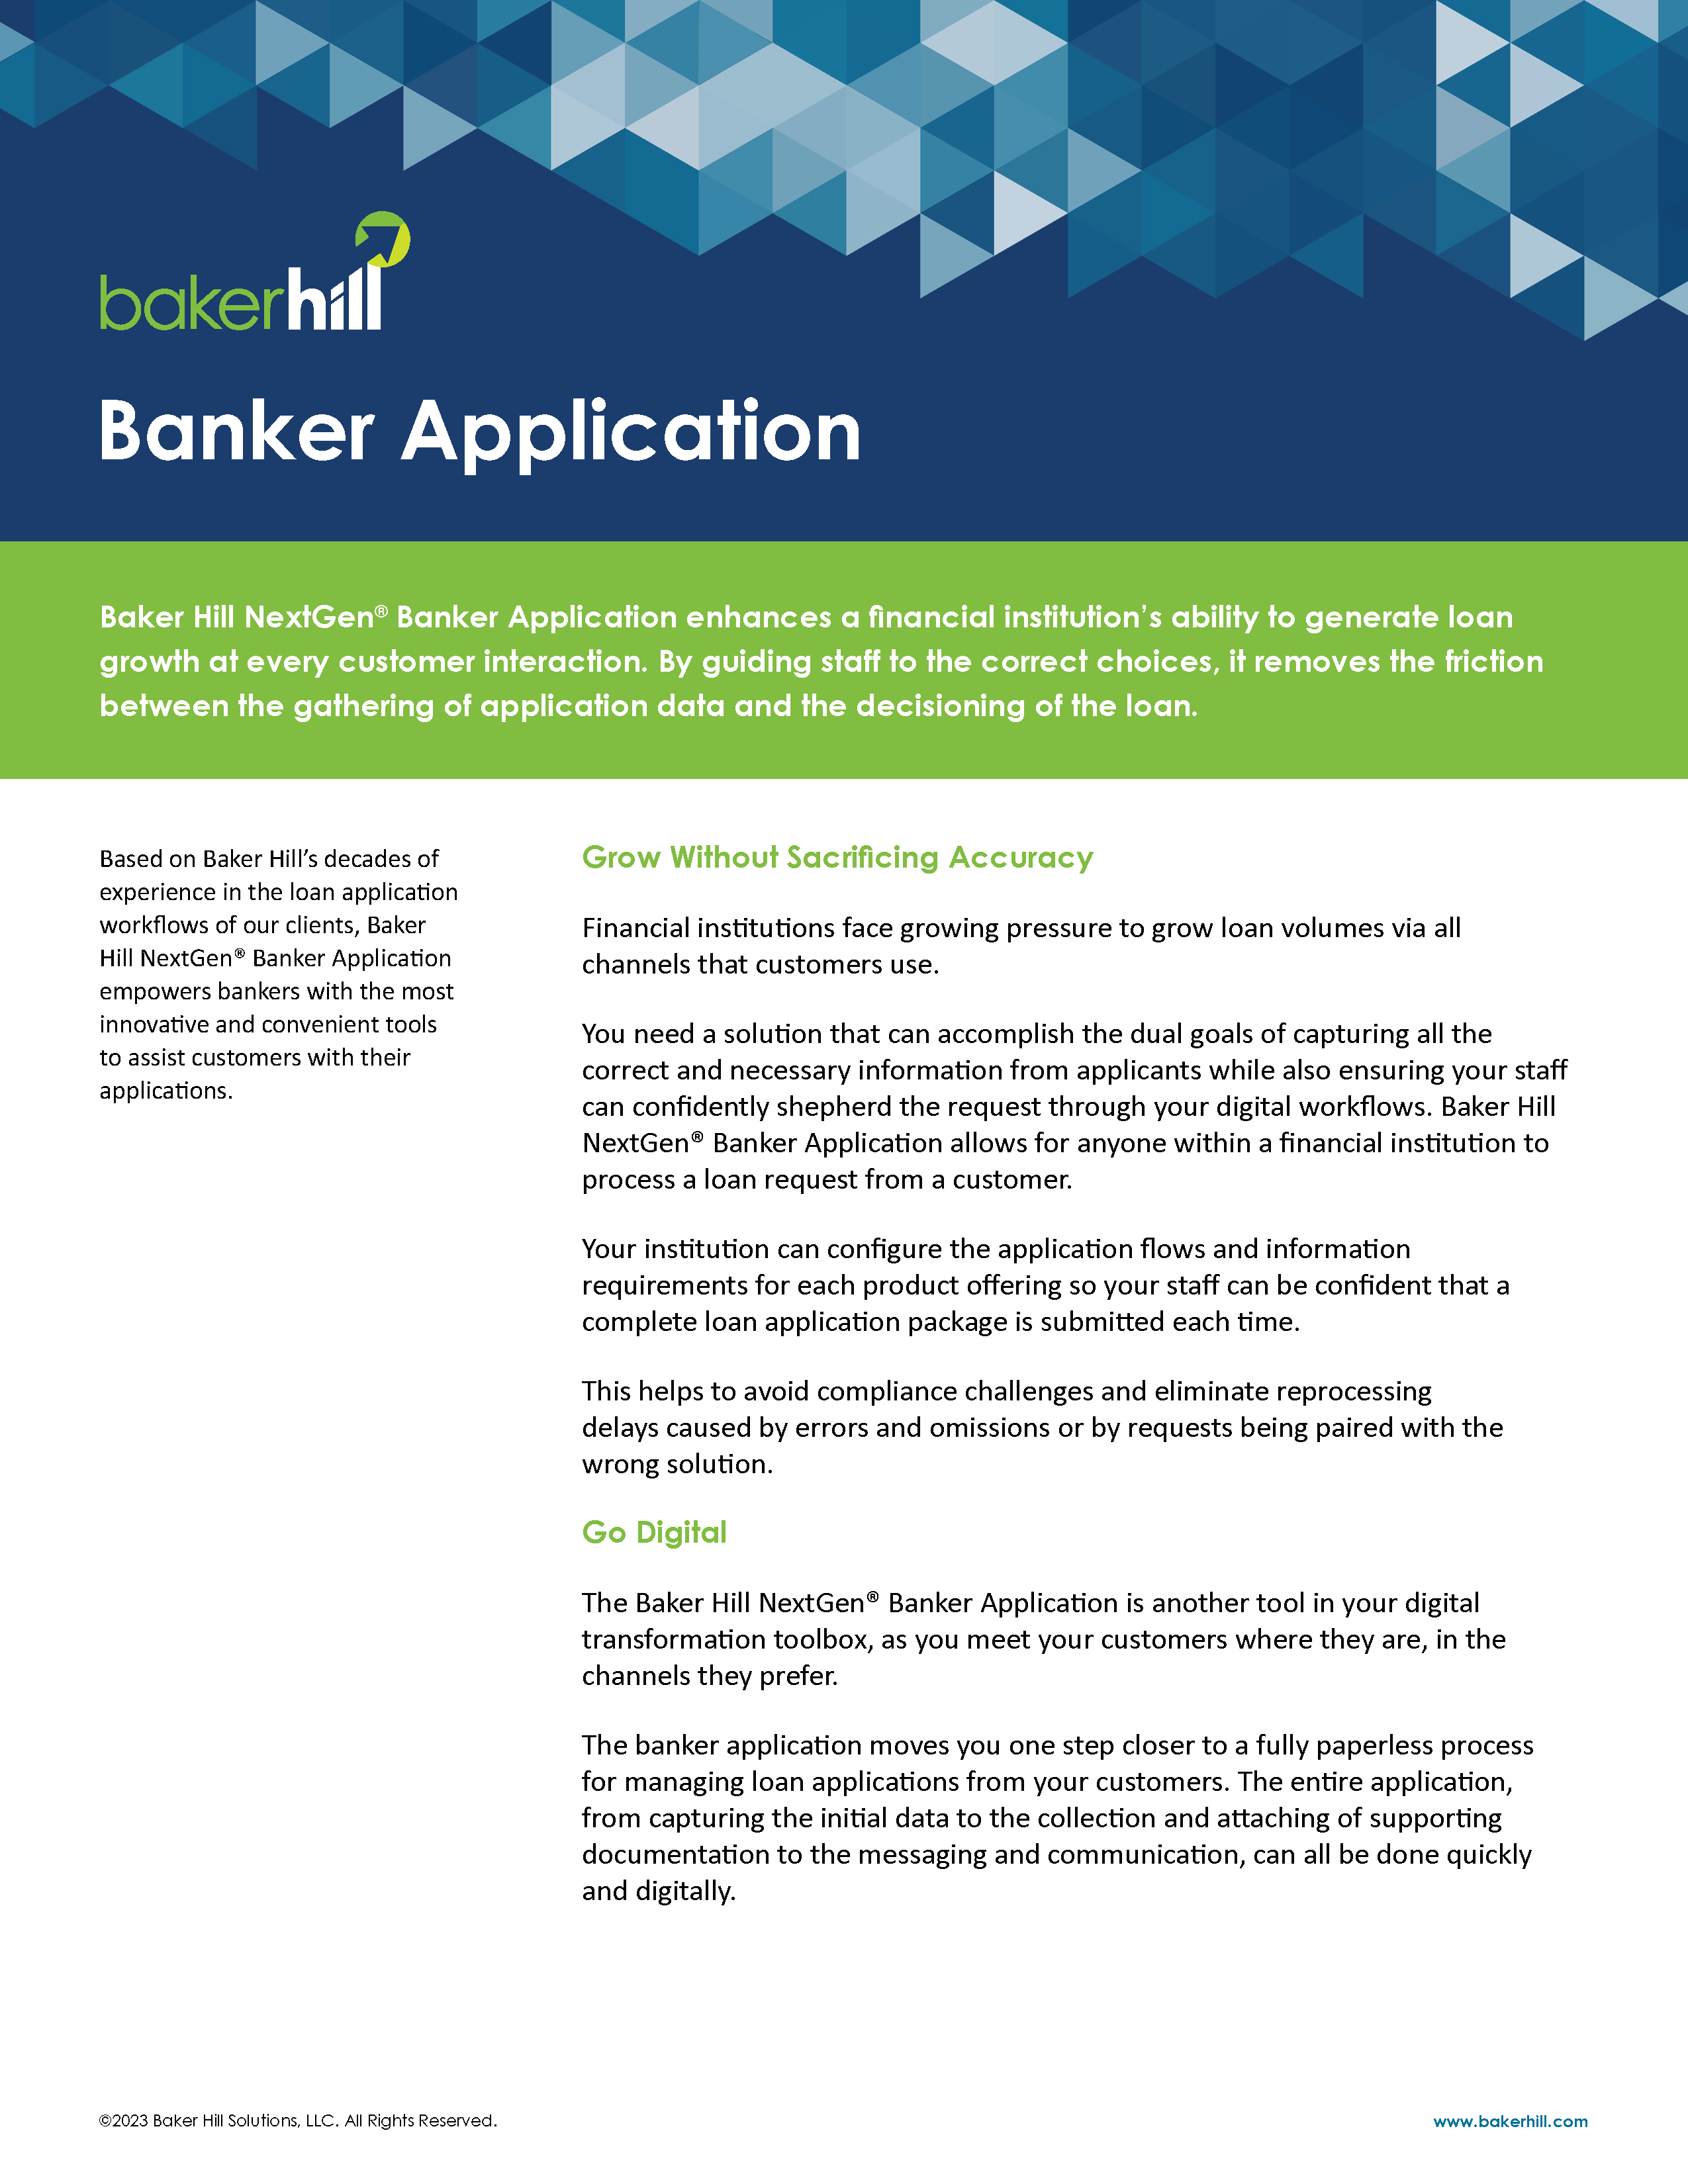 Baker Hill NextGen® Banker Application lets you make the most of every customer interaction.